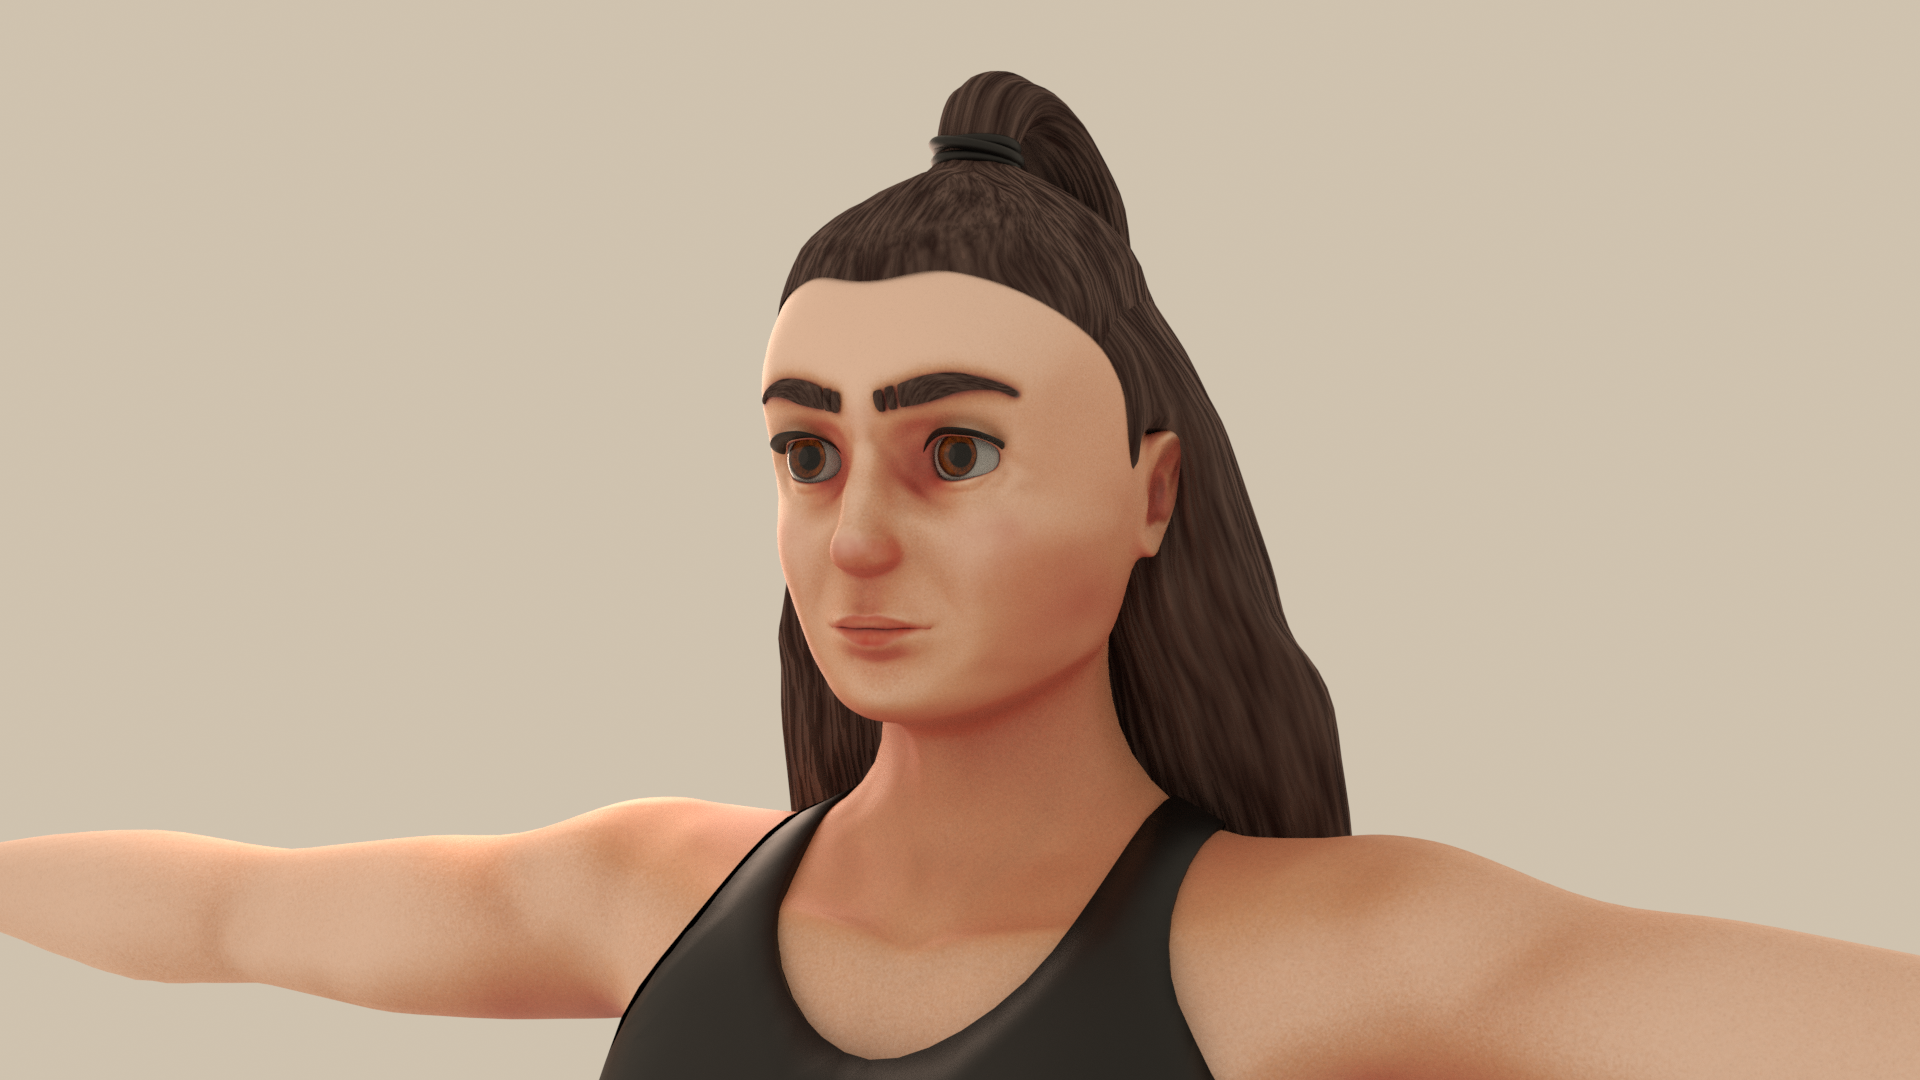 A 3D render of a stylized woman with a black tank-top and high pony tail